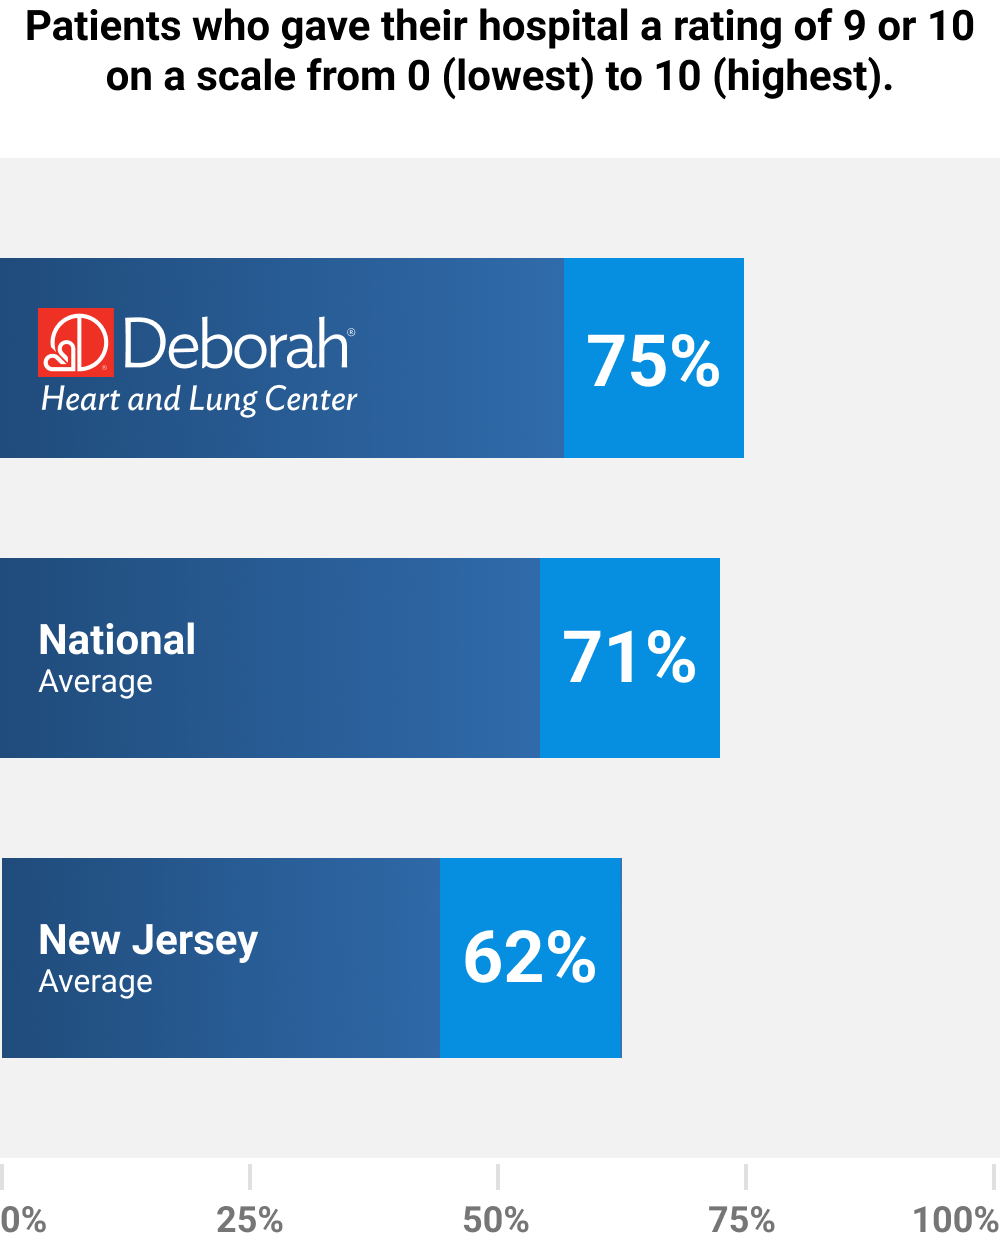 Patients who gave their hospital a rating of 9 or 10 on a scale from 0 (lowest) to 10 (highest). Deborah: 75%, National Average: 71%, New Jersey Average: 62%